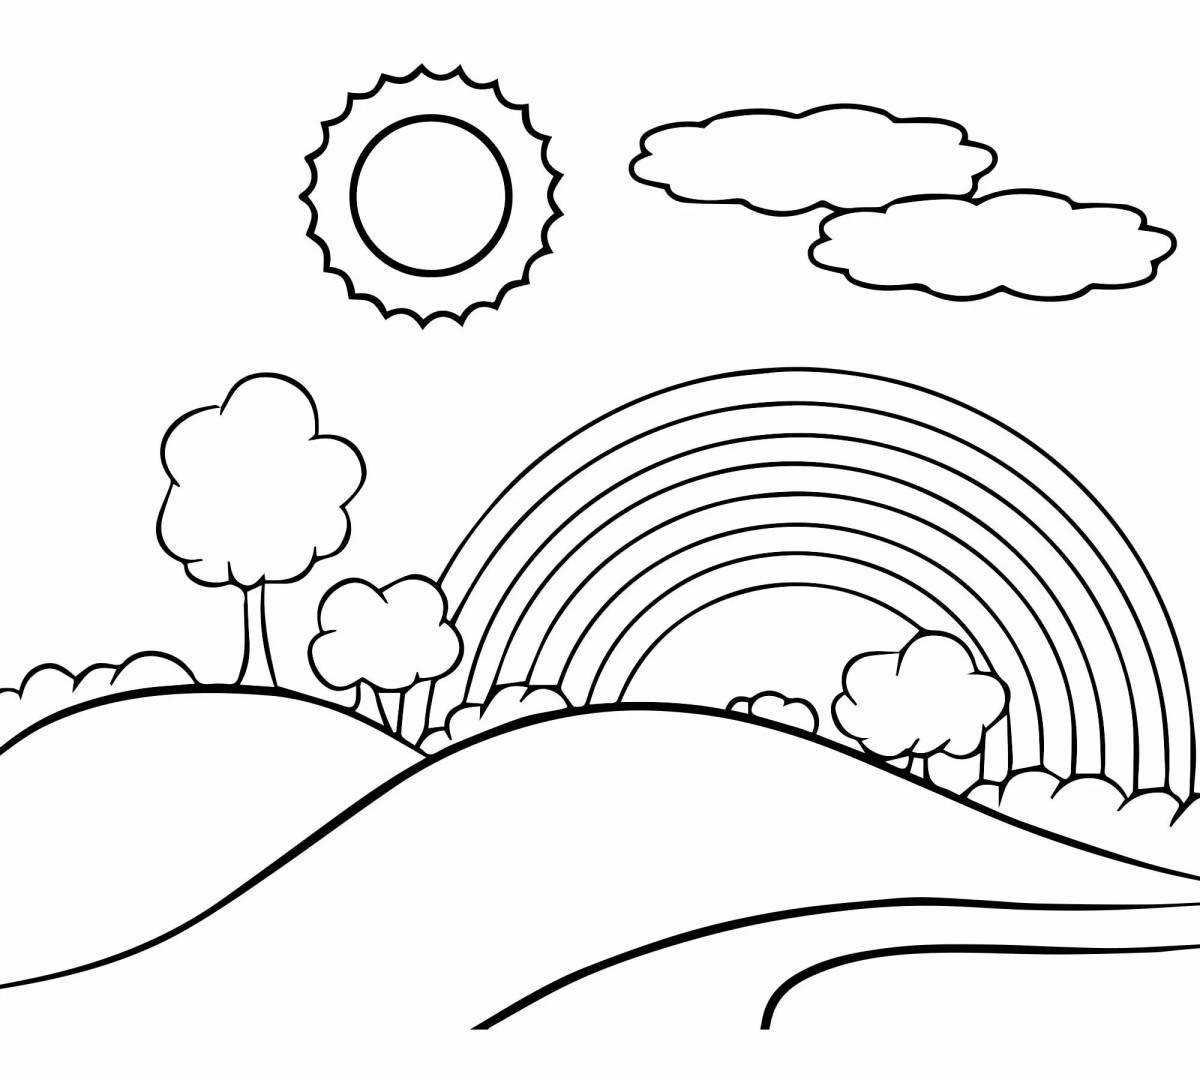 Coloring page magic rainbow house